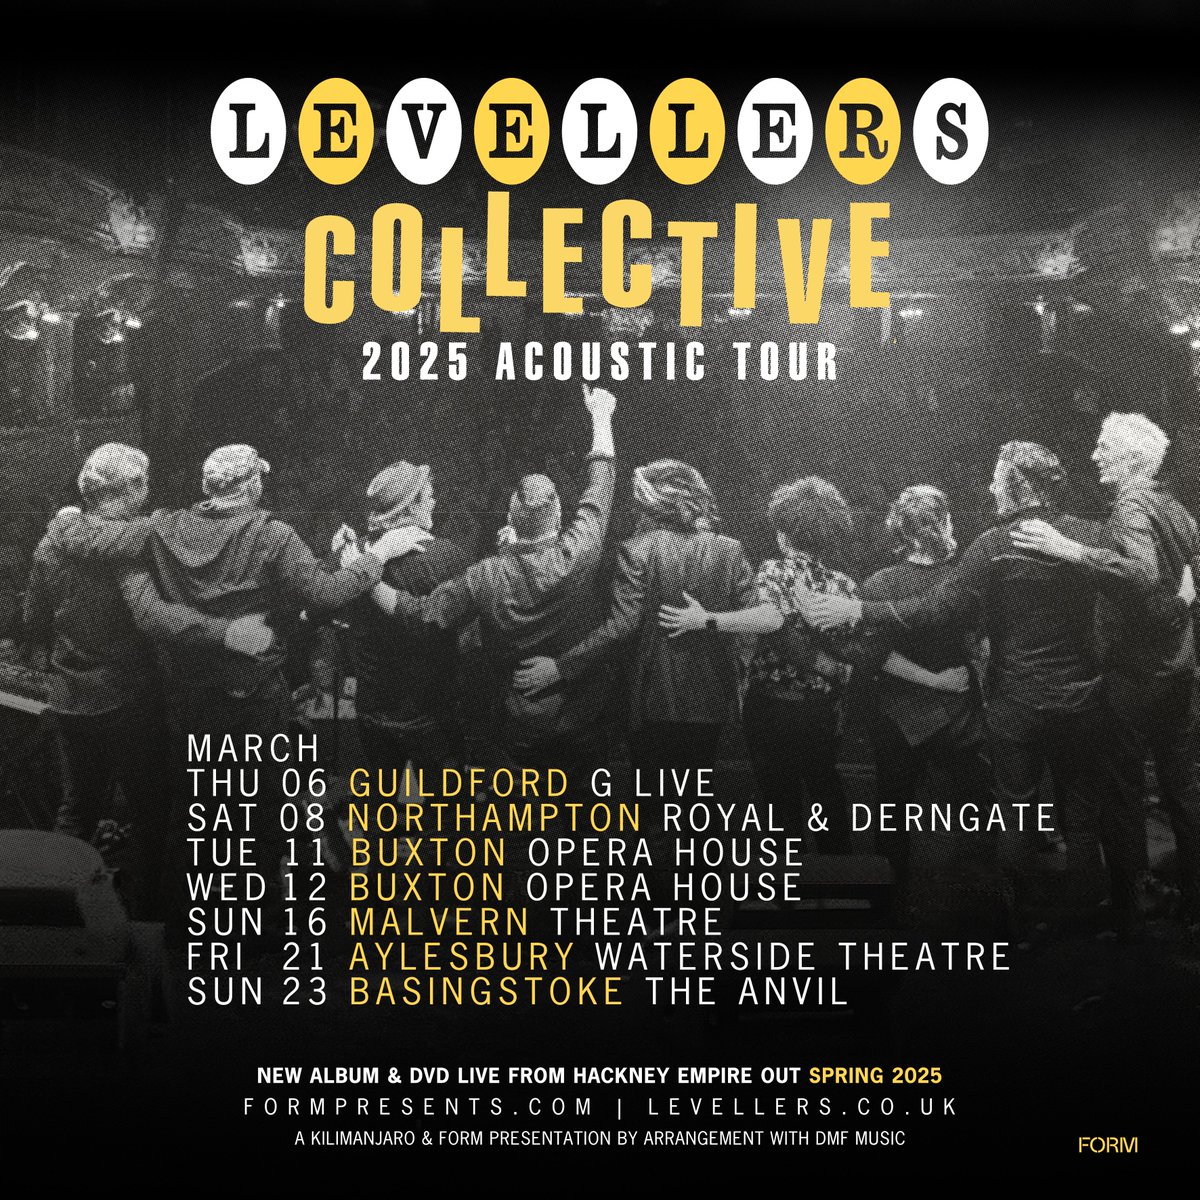 After two highly acclaimed acoustic tours and albums in recent years, the Levellers Collective have announced a new acoustic tour for Spring 2025! The tour will be accompanied by the release of a brand new live album and DVD from Hackney Empire. 🎟 Tickets on sale 10am Friday.